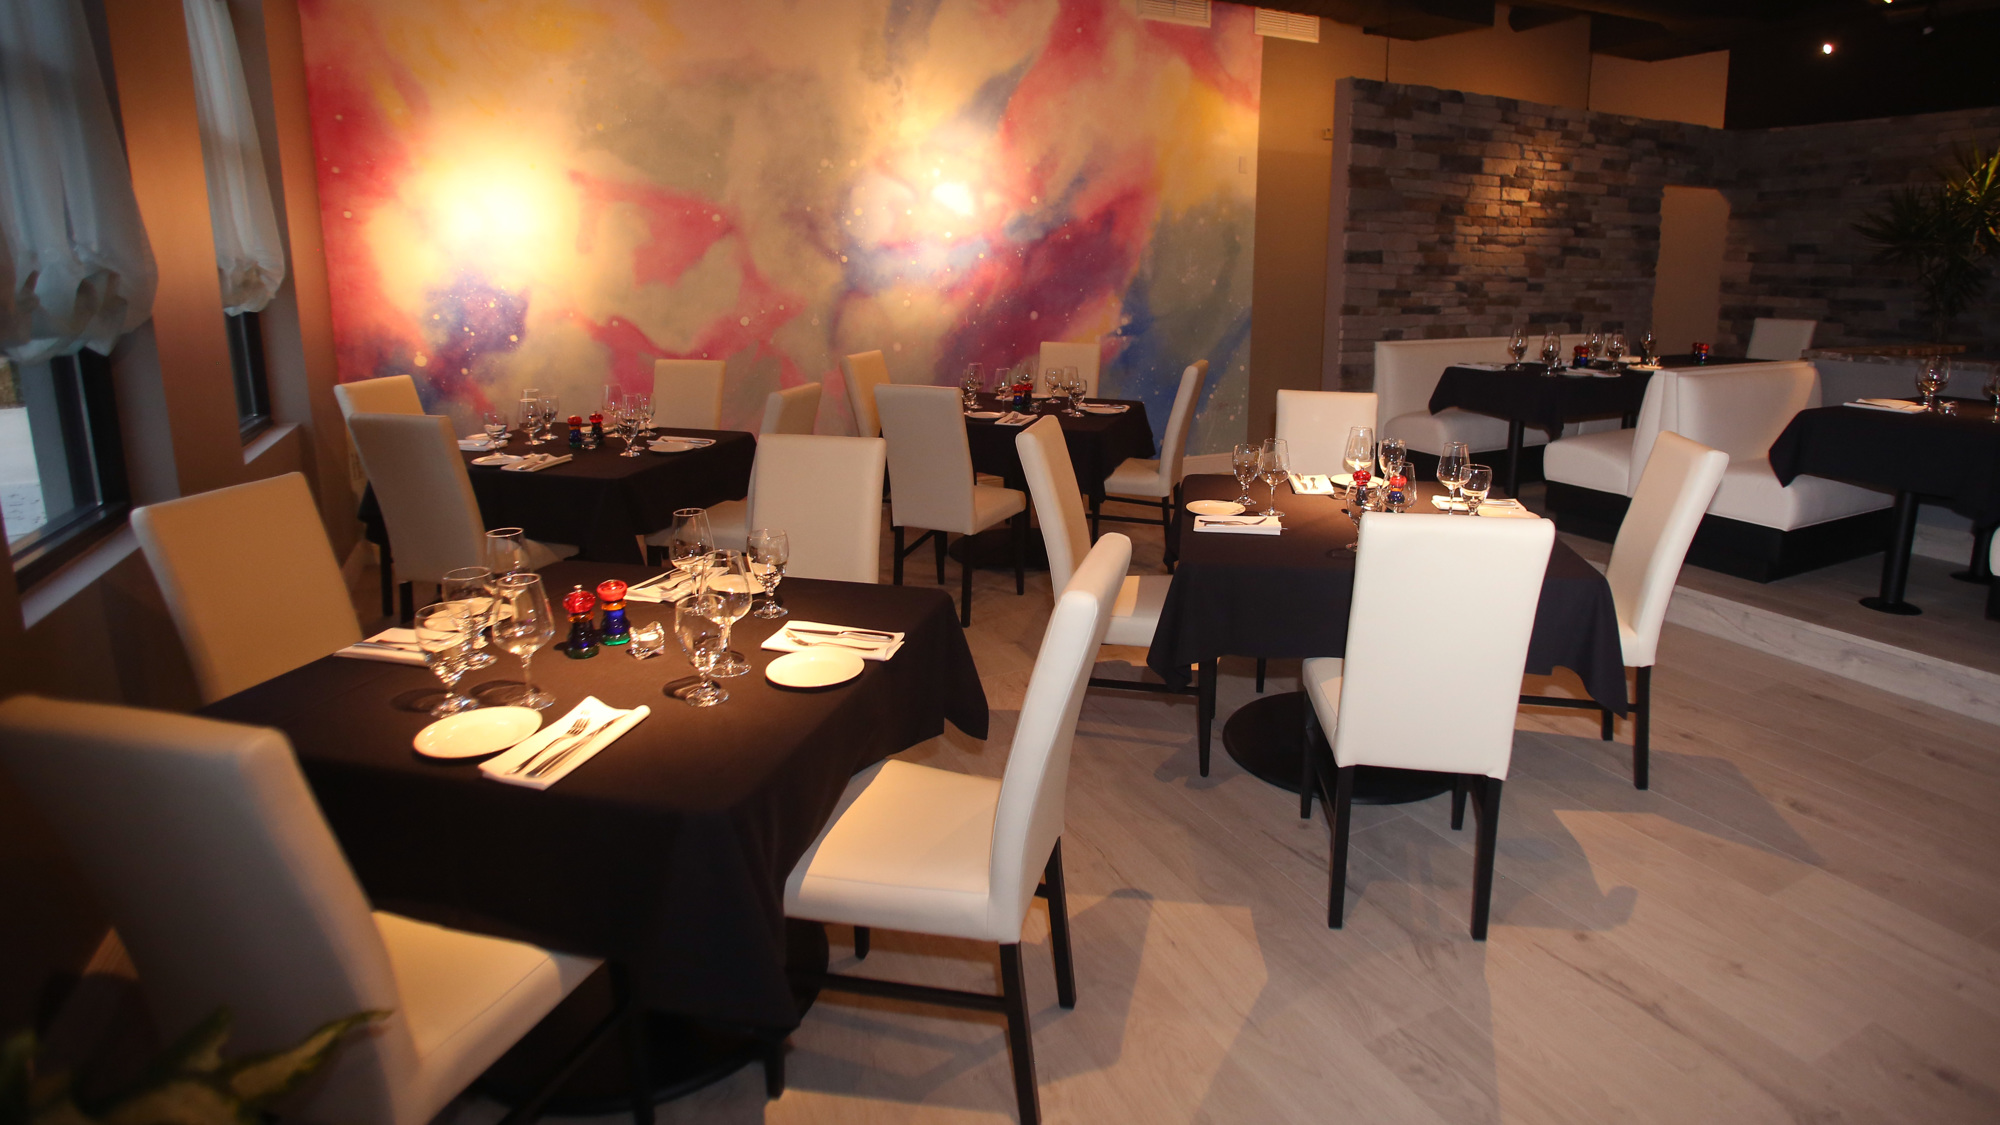 Matthew’s Steakhouse aims to blend a down-home feel with a fine-dining experience.